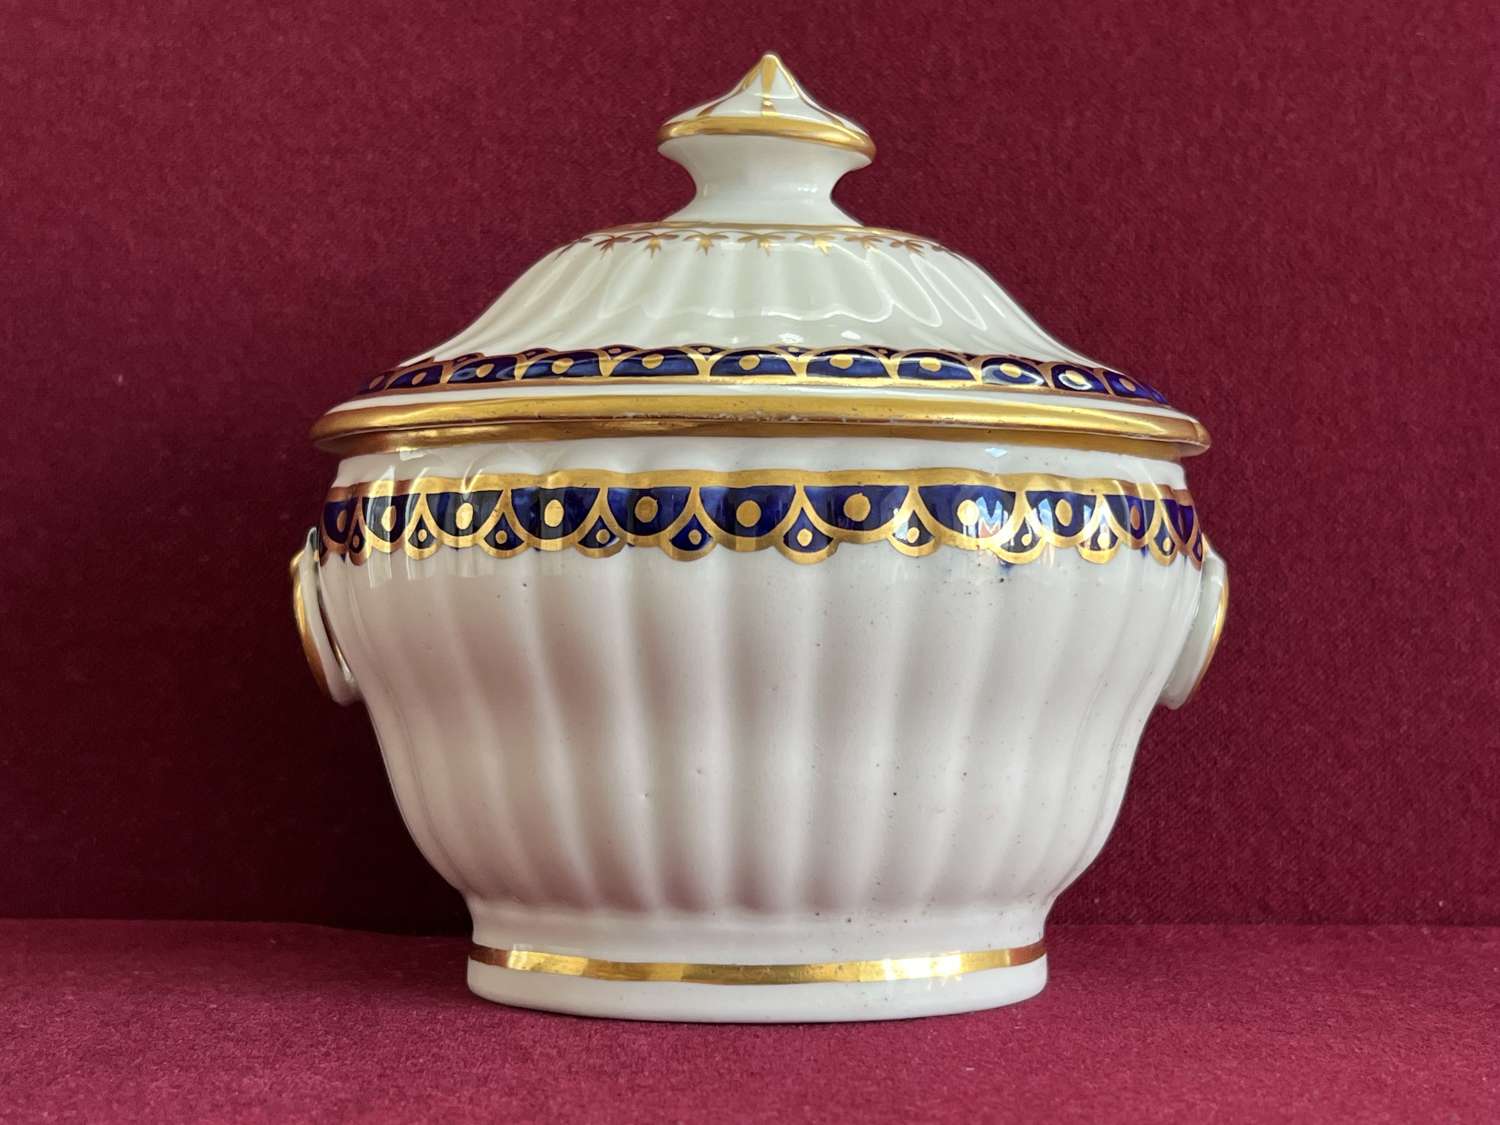 An early New Hall hard-paste porcelain Sugar Box in pattern 155 c.1797